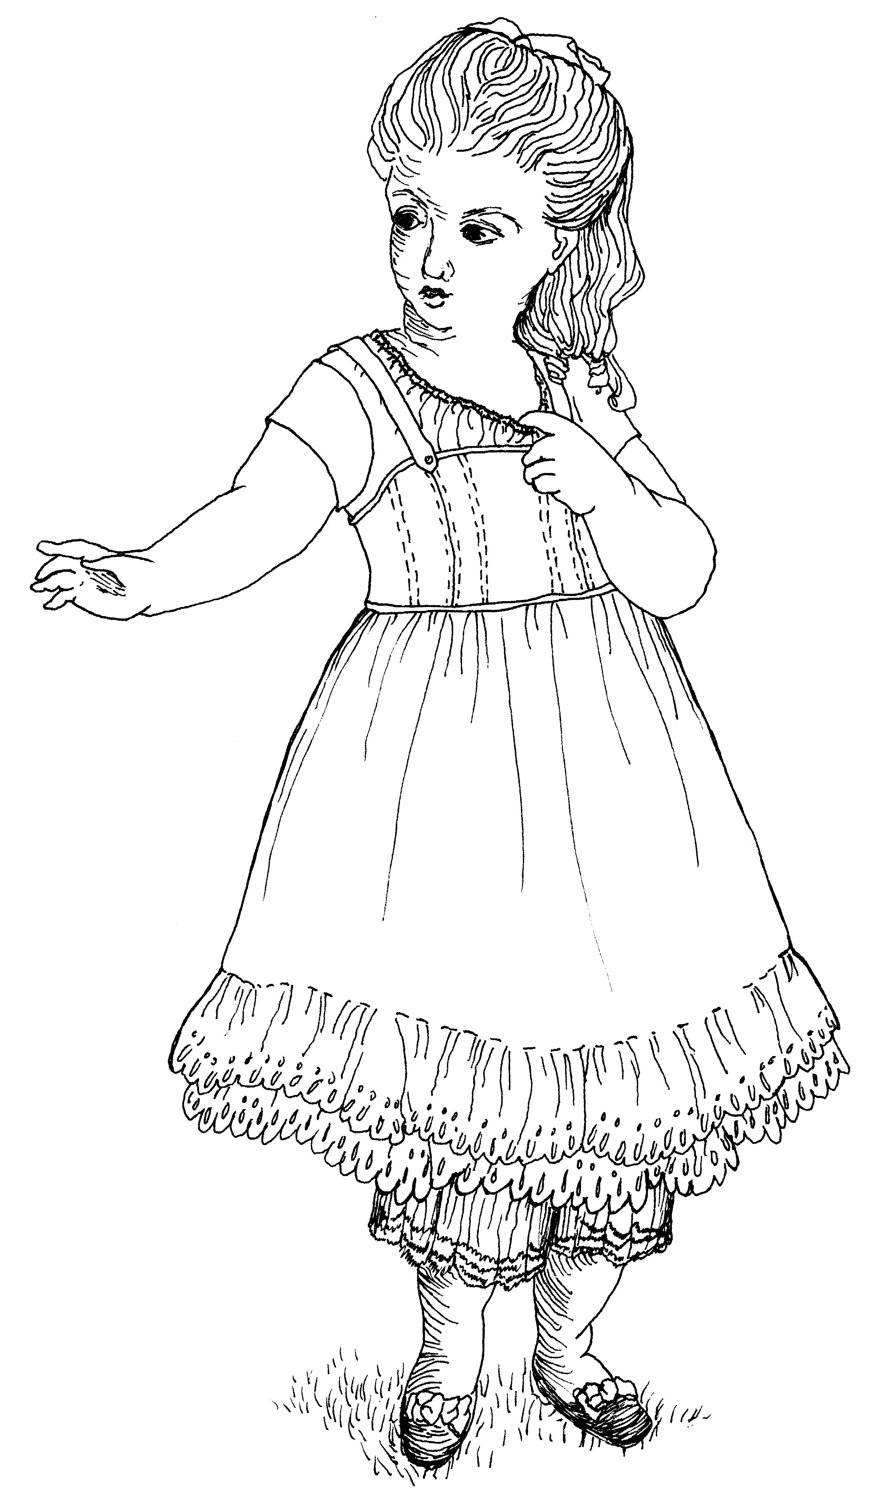 American girl doll coloring pages